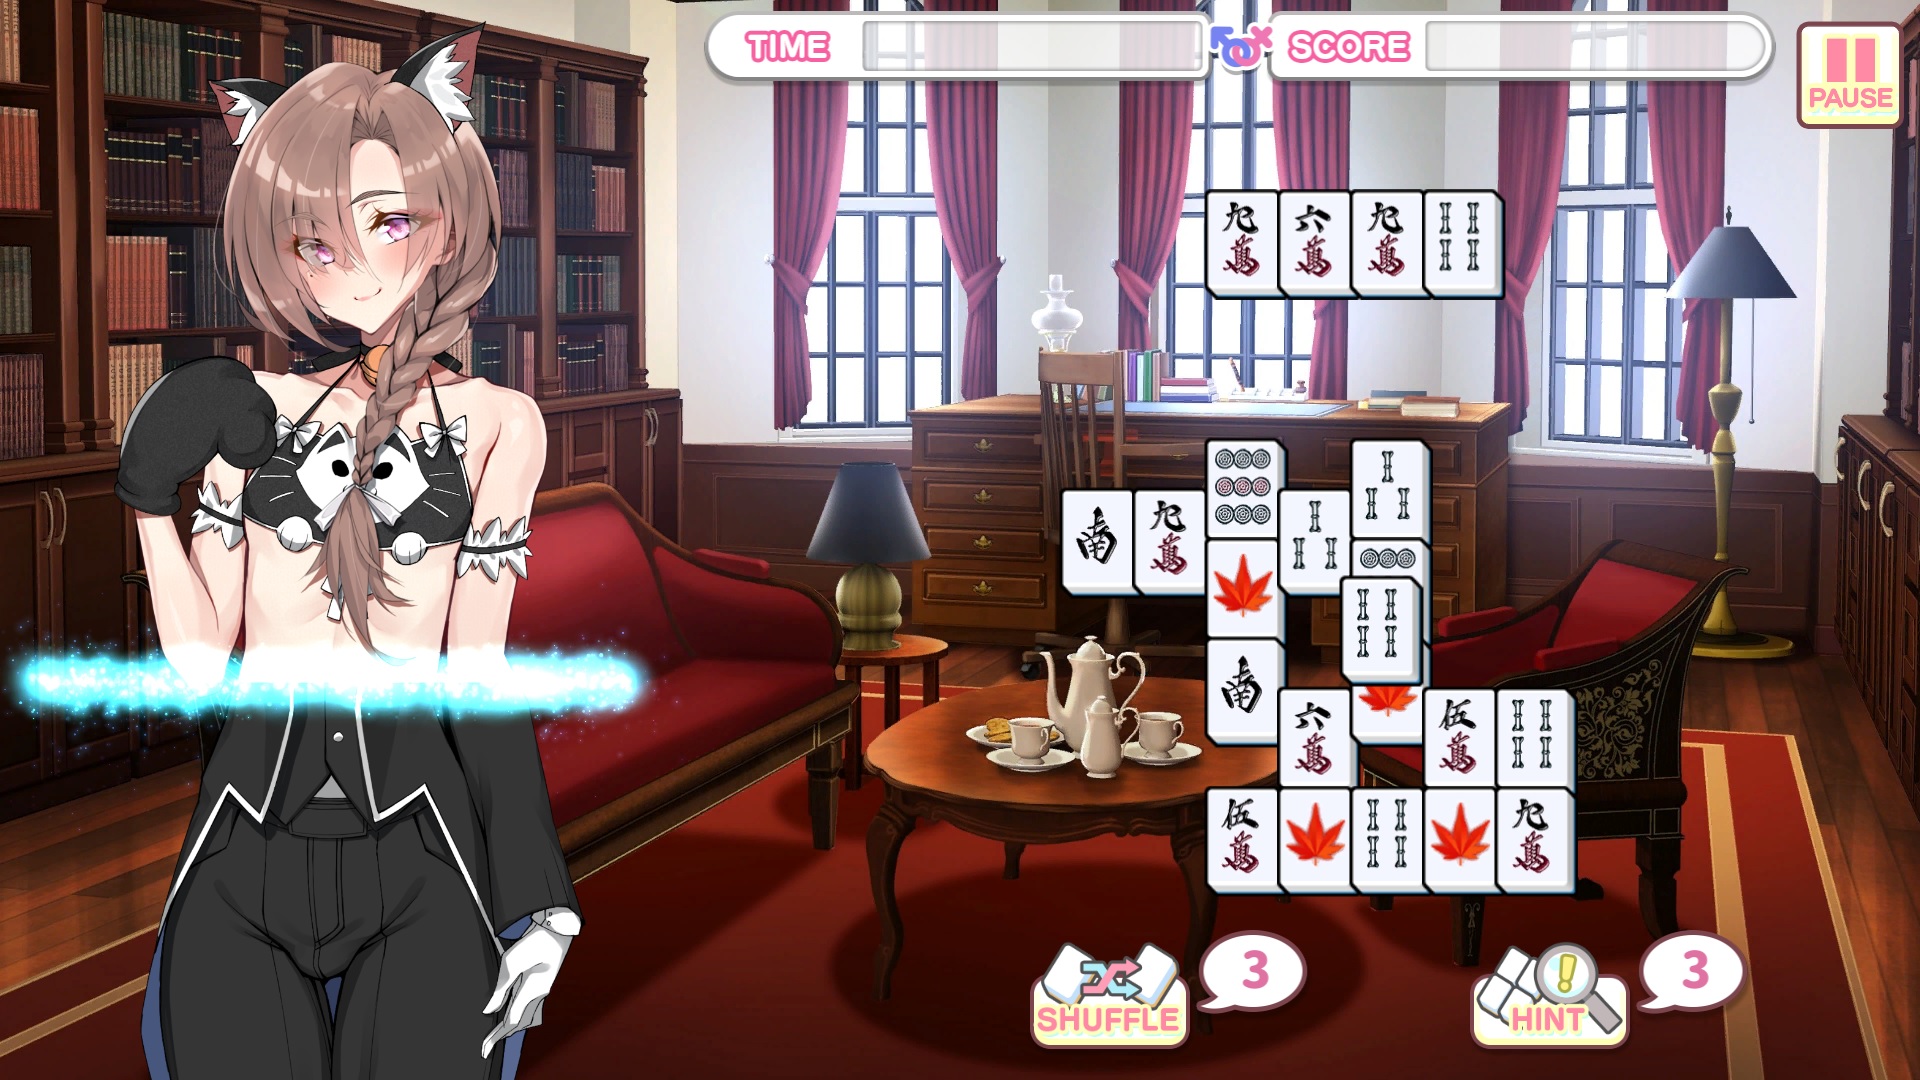 A person with cat ears is standing on the left. Her top is like a kitty bikini, but her bottom is a tuxedo. A blue line shows change is happening. To the right is a mahjong board, with three hints and three shuffles available.